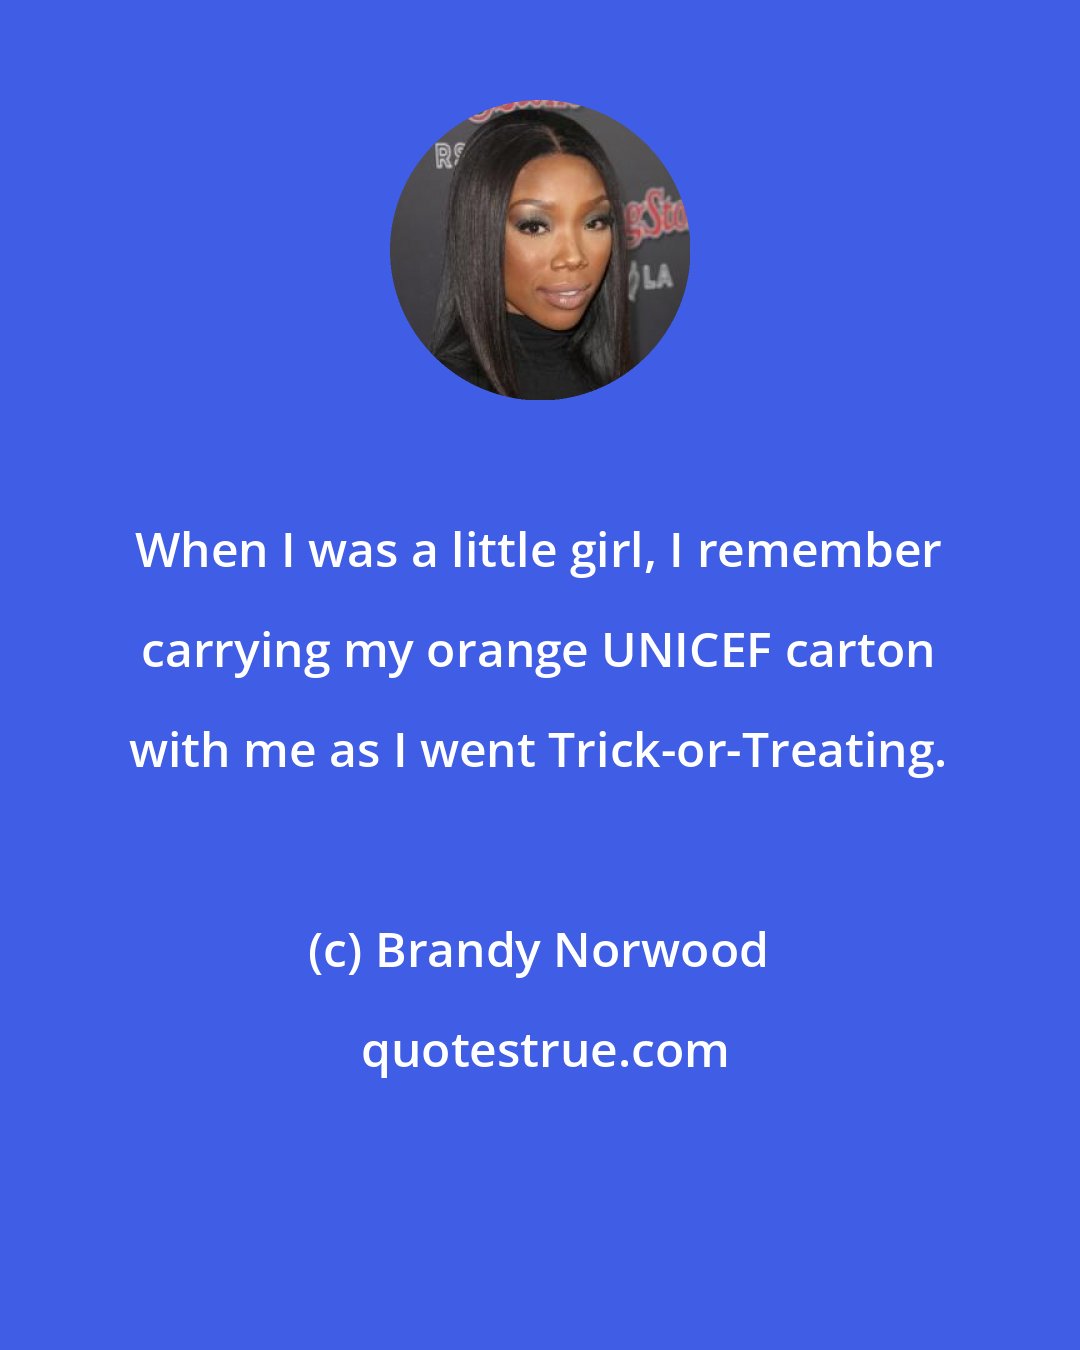 Brandy Norwood: When I was a little girl, I remember carrying my orange UNICEF carton with me as I went Trick-or-Treating.